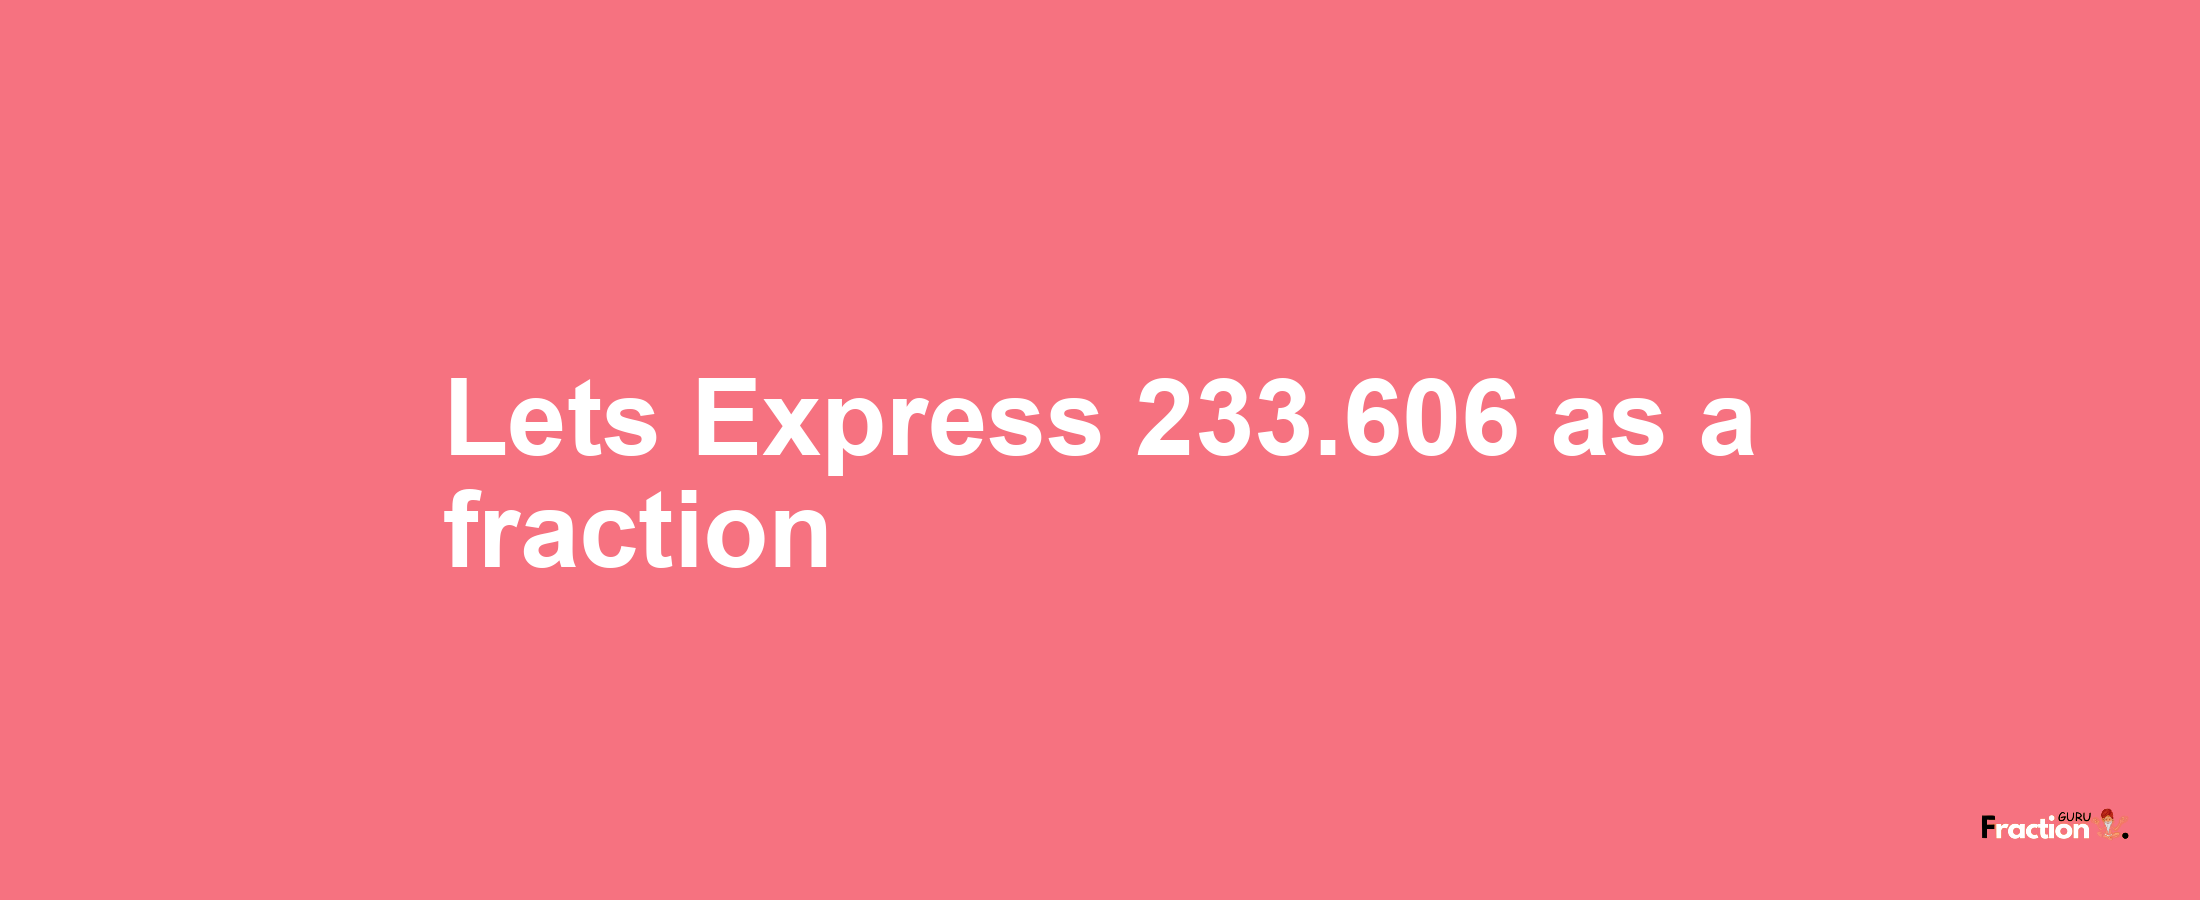 Lets Express 233.606 as afraction